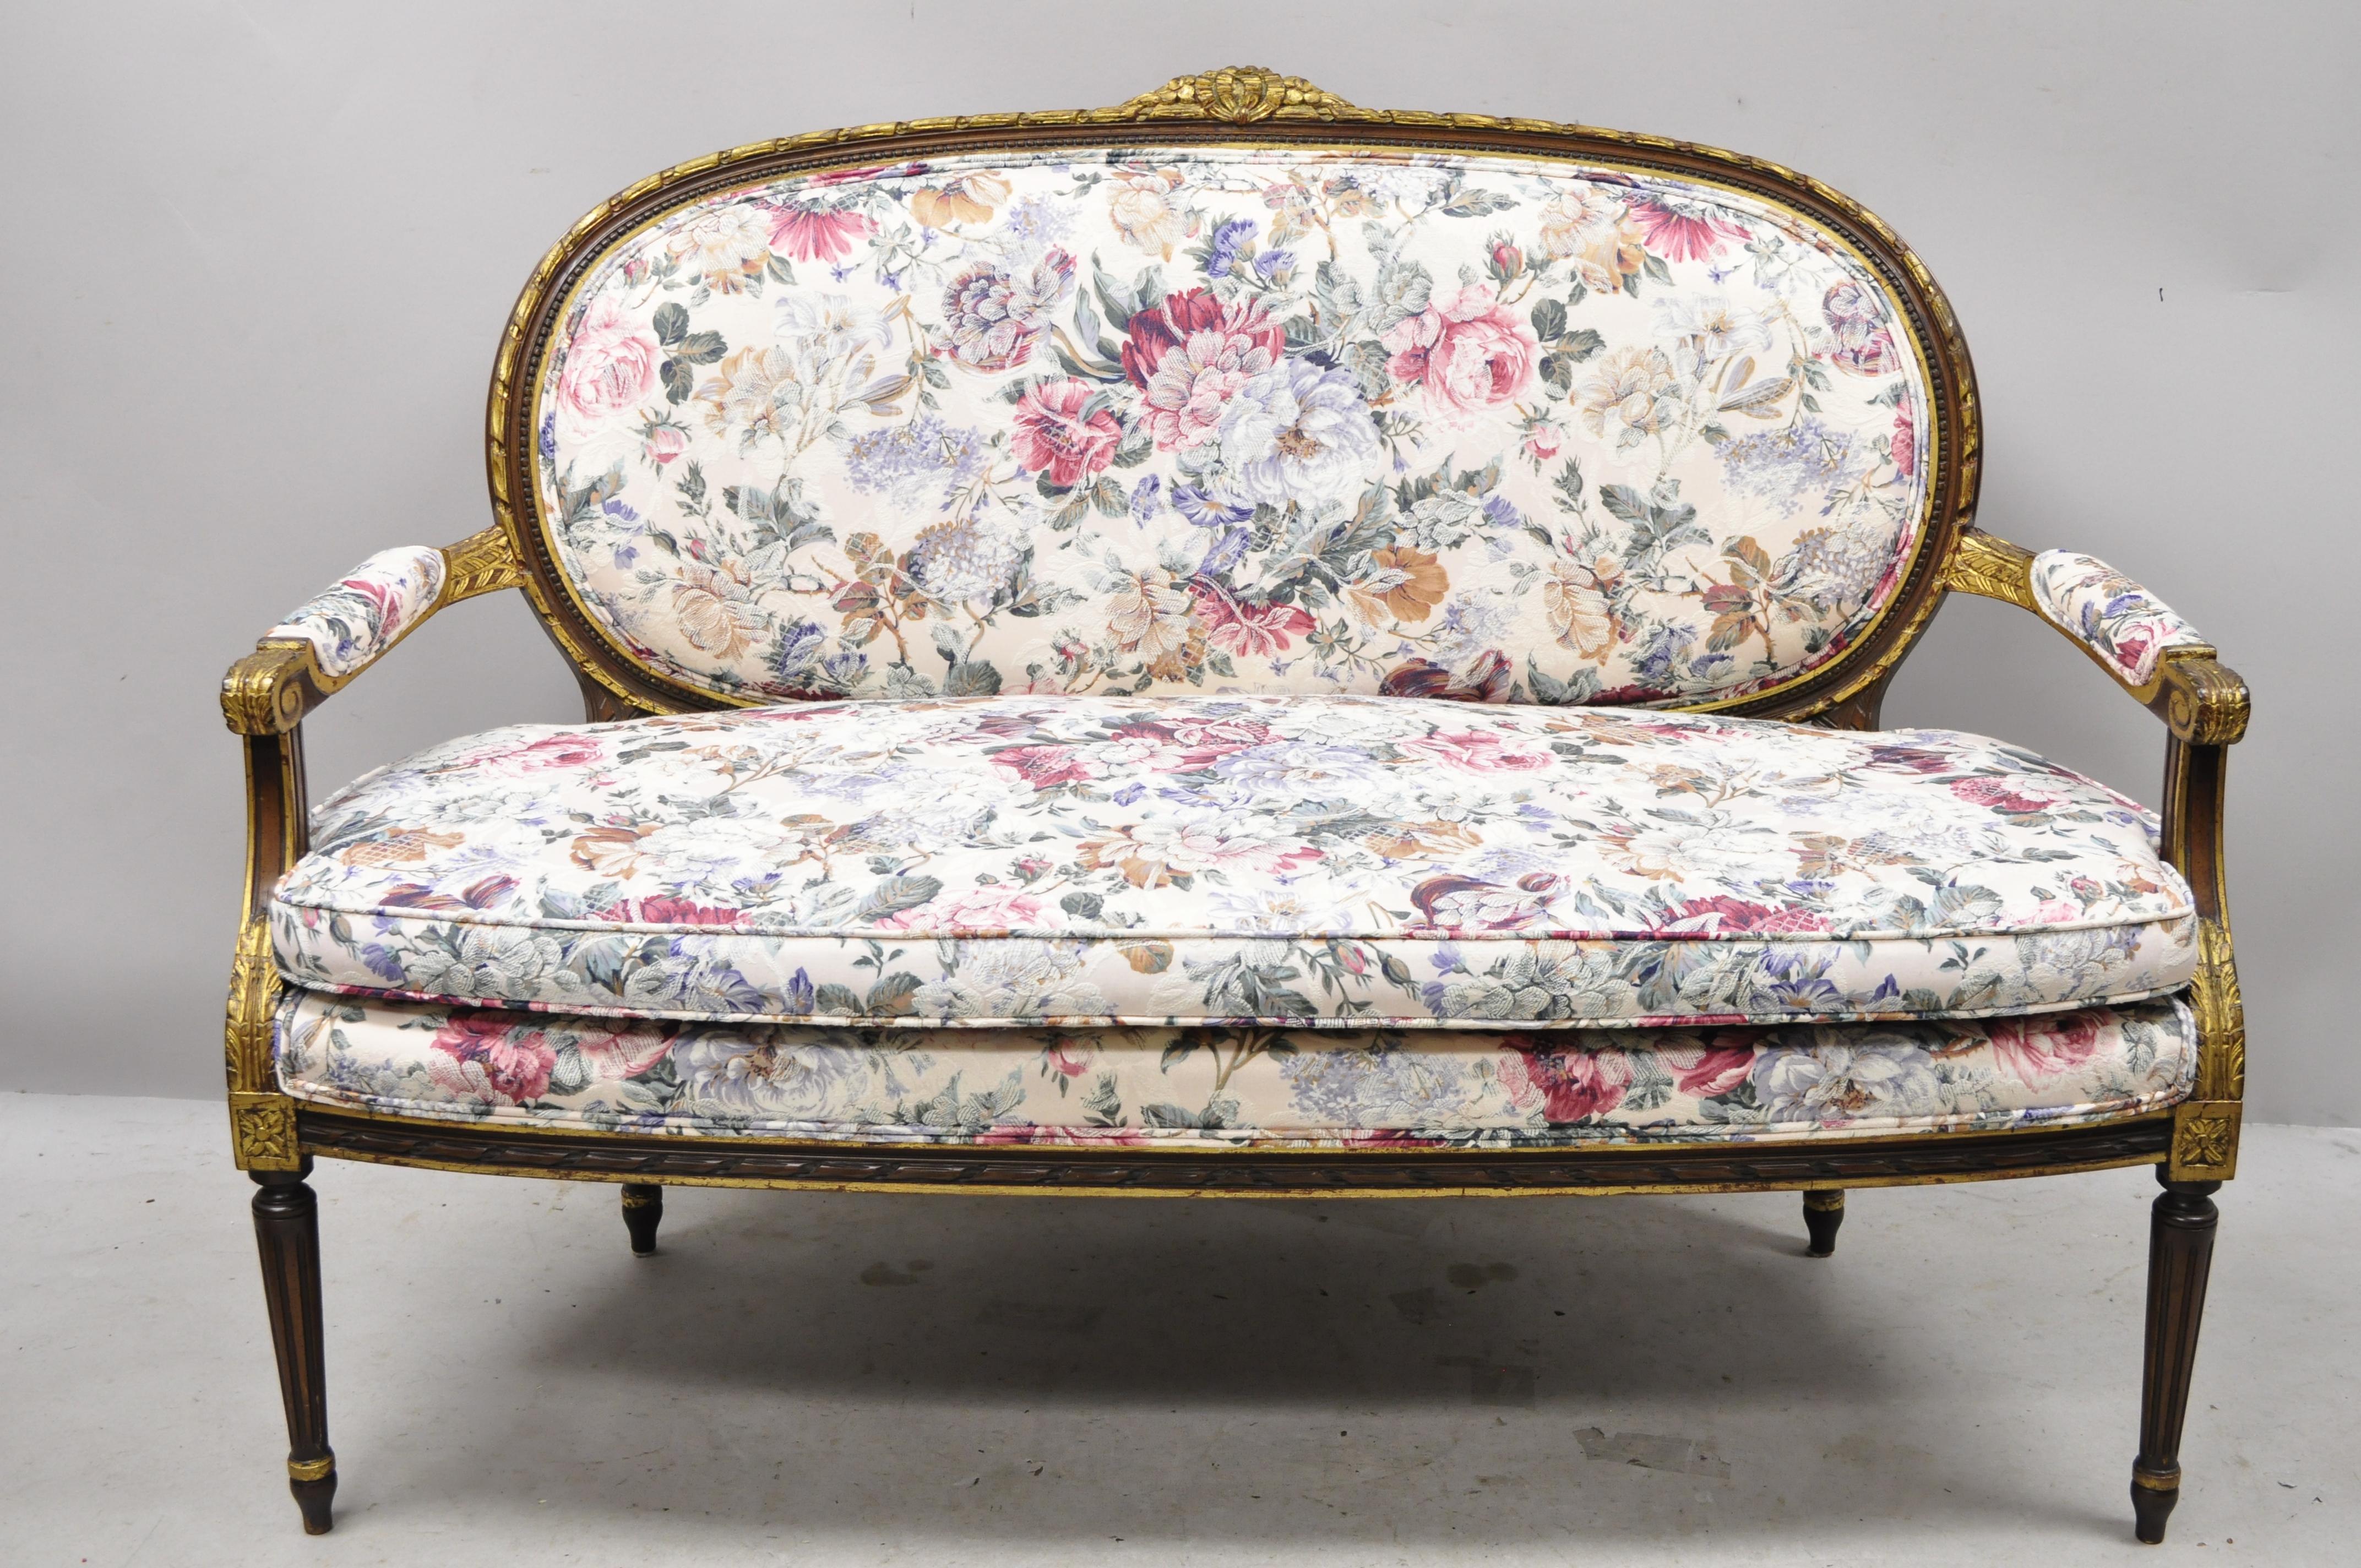 North American Vintage French Louis XVI Gold Giltwood Floral Upholstered Loveseat Settee Sofa